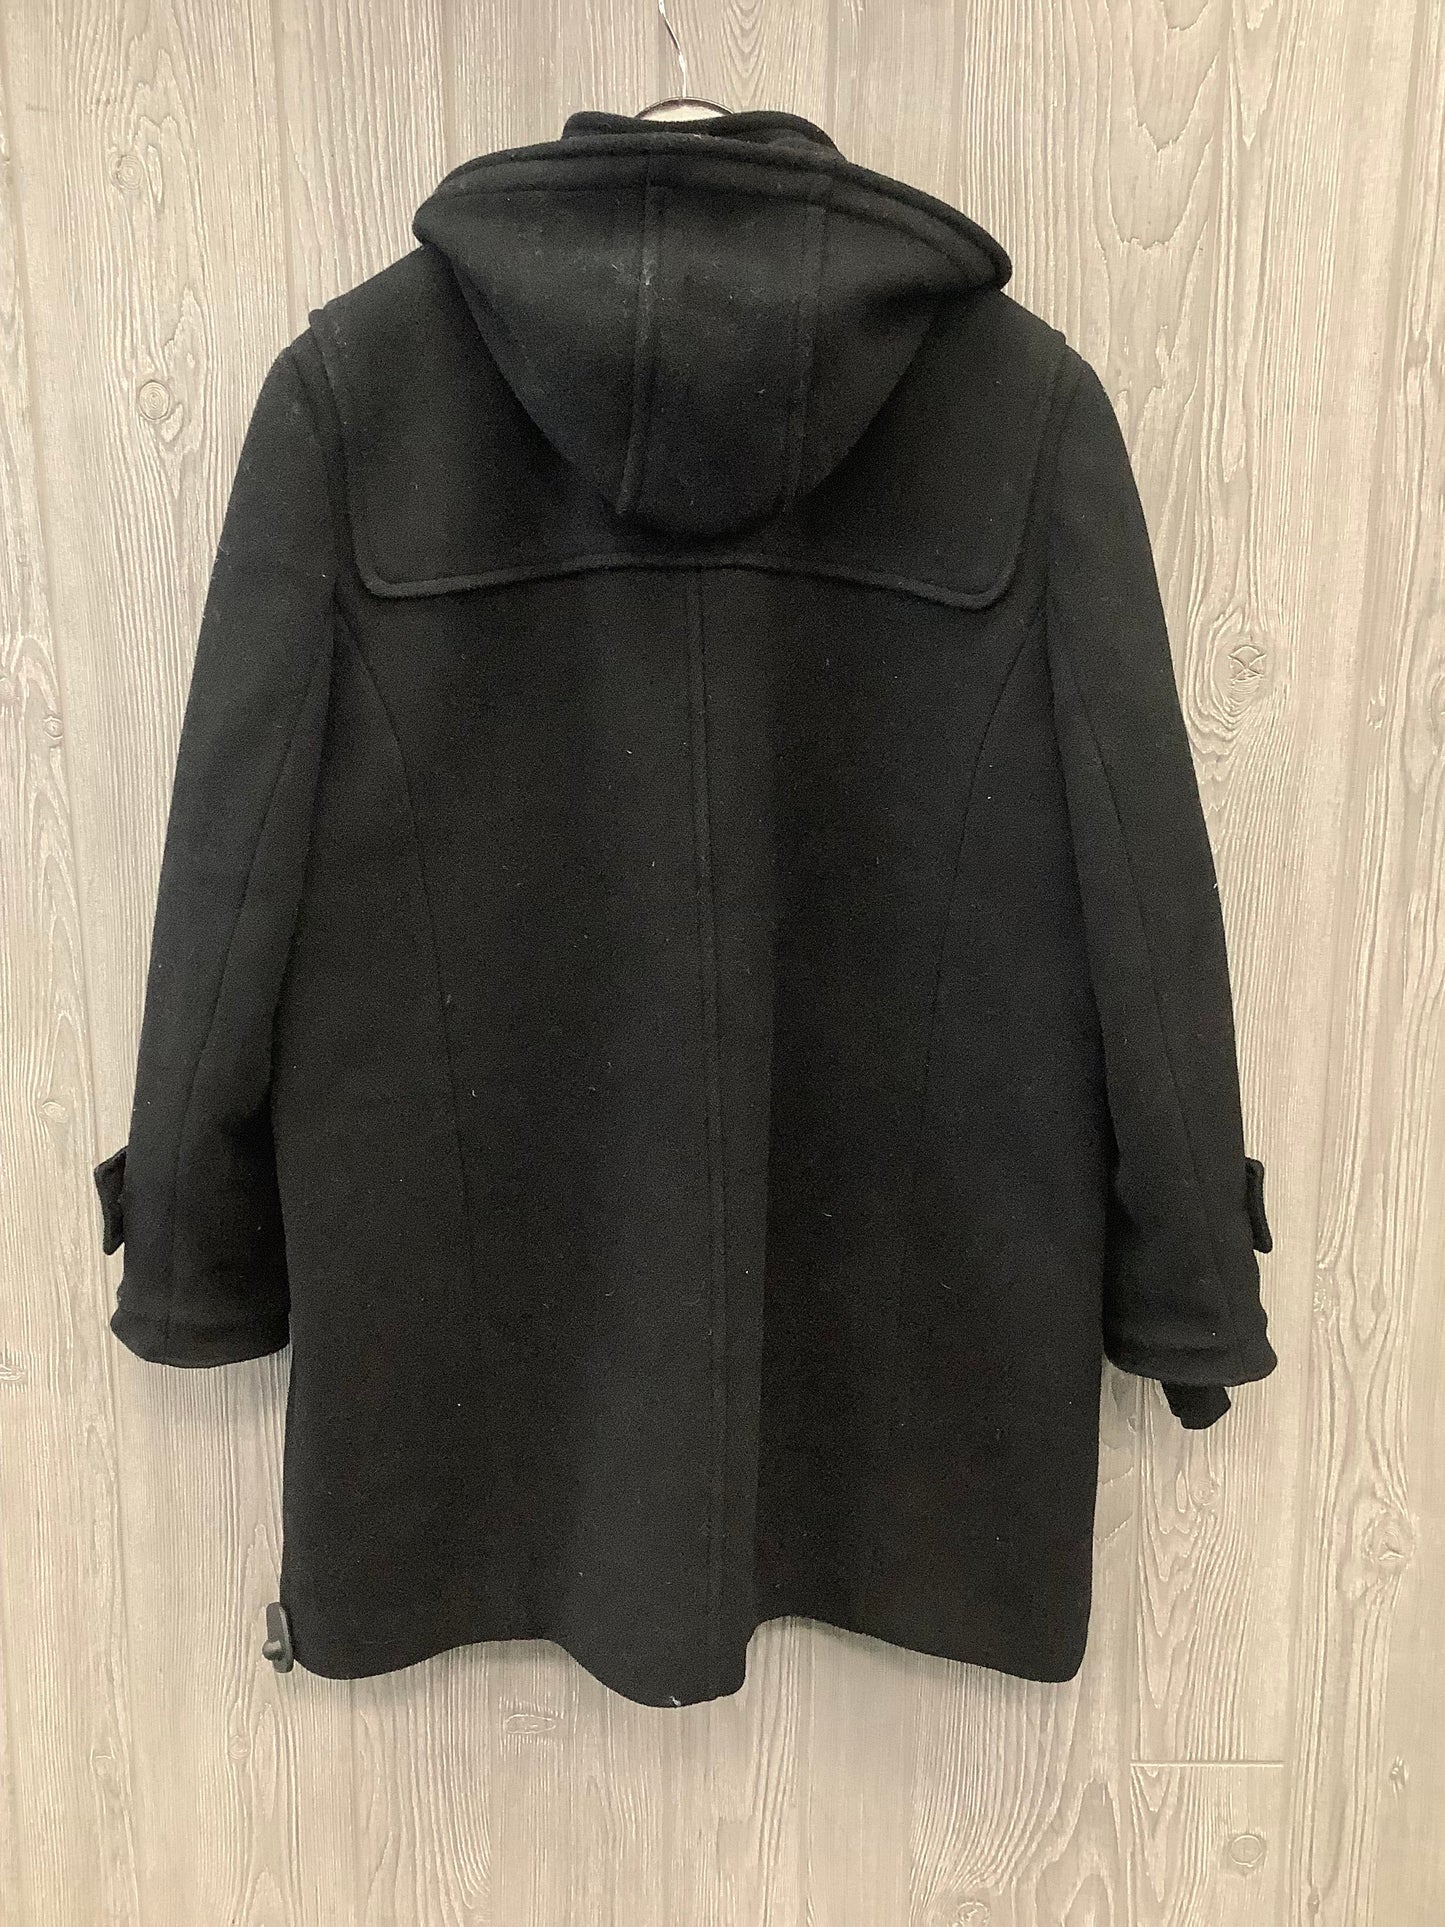 Coat Other By Lands End  Size: 2x